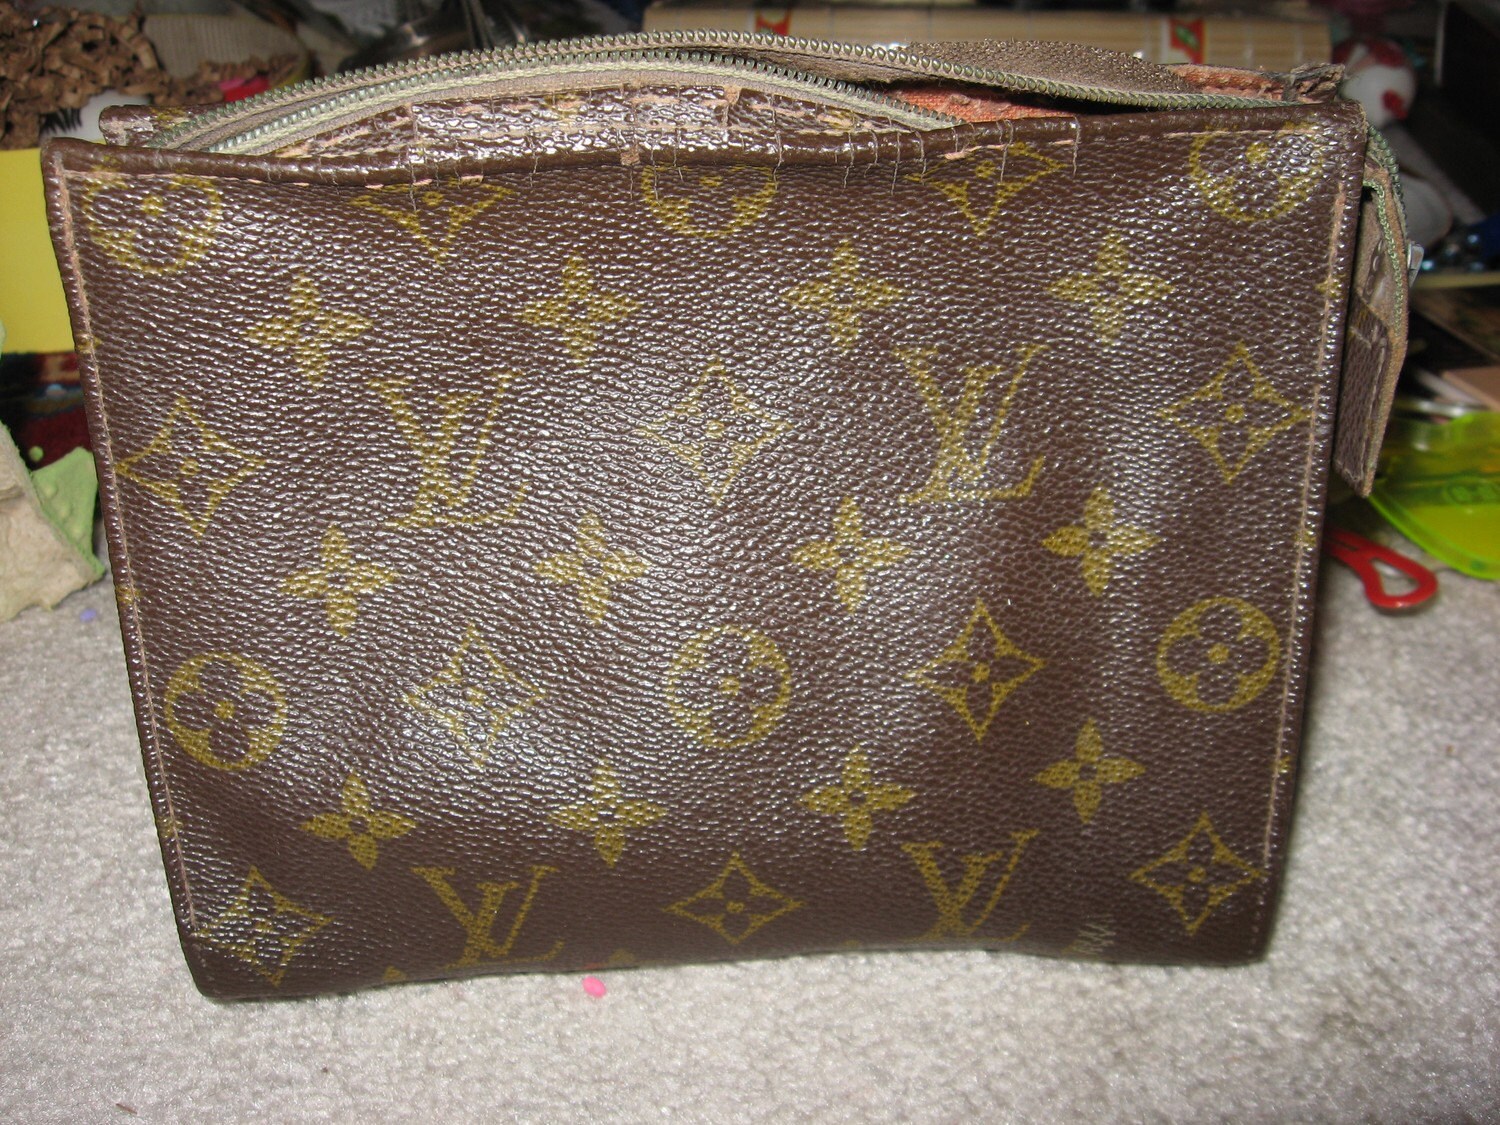 HOLD FOR Dietch4 Louis VUITTON Vintage Cosmetic Handbag Bag